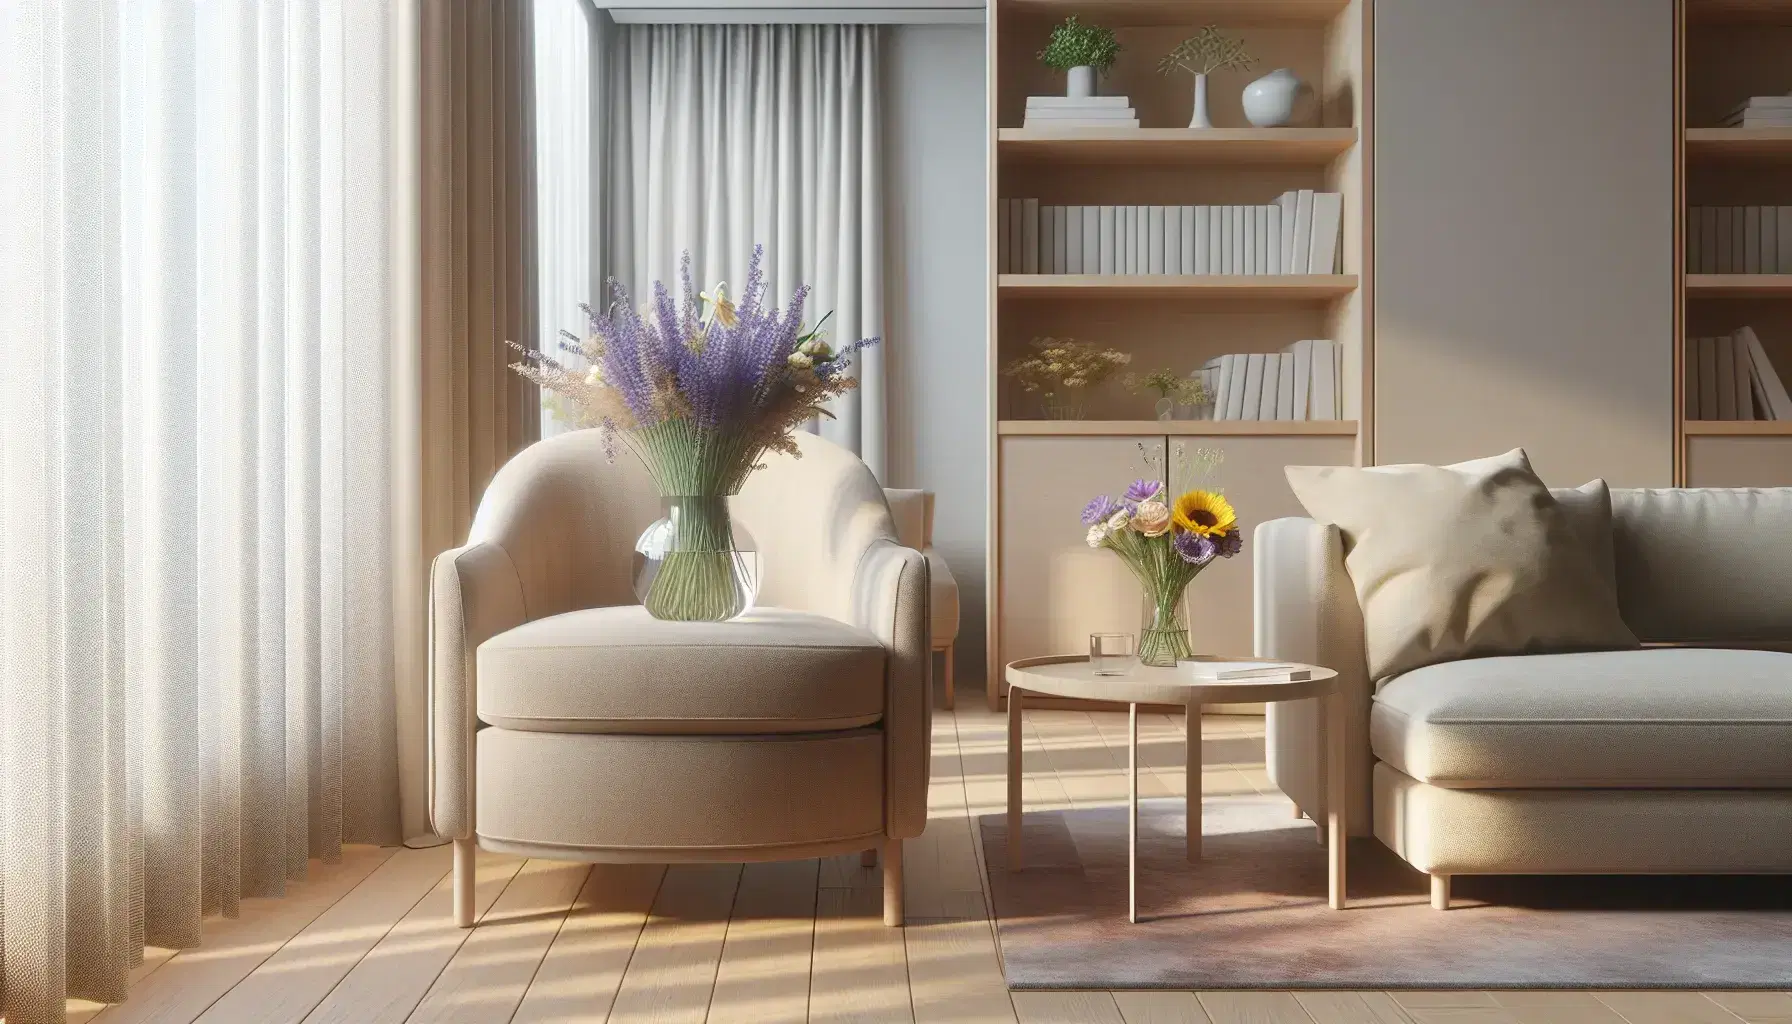 Cozy therapeutic office with beige armchair, sofa, coffee table with vase of colorful flowers, bookcase and green plant, in bright and peaceful environment.